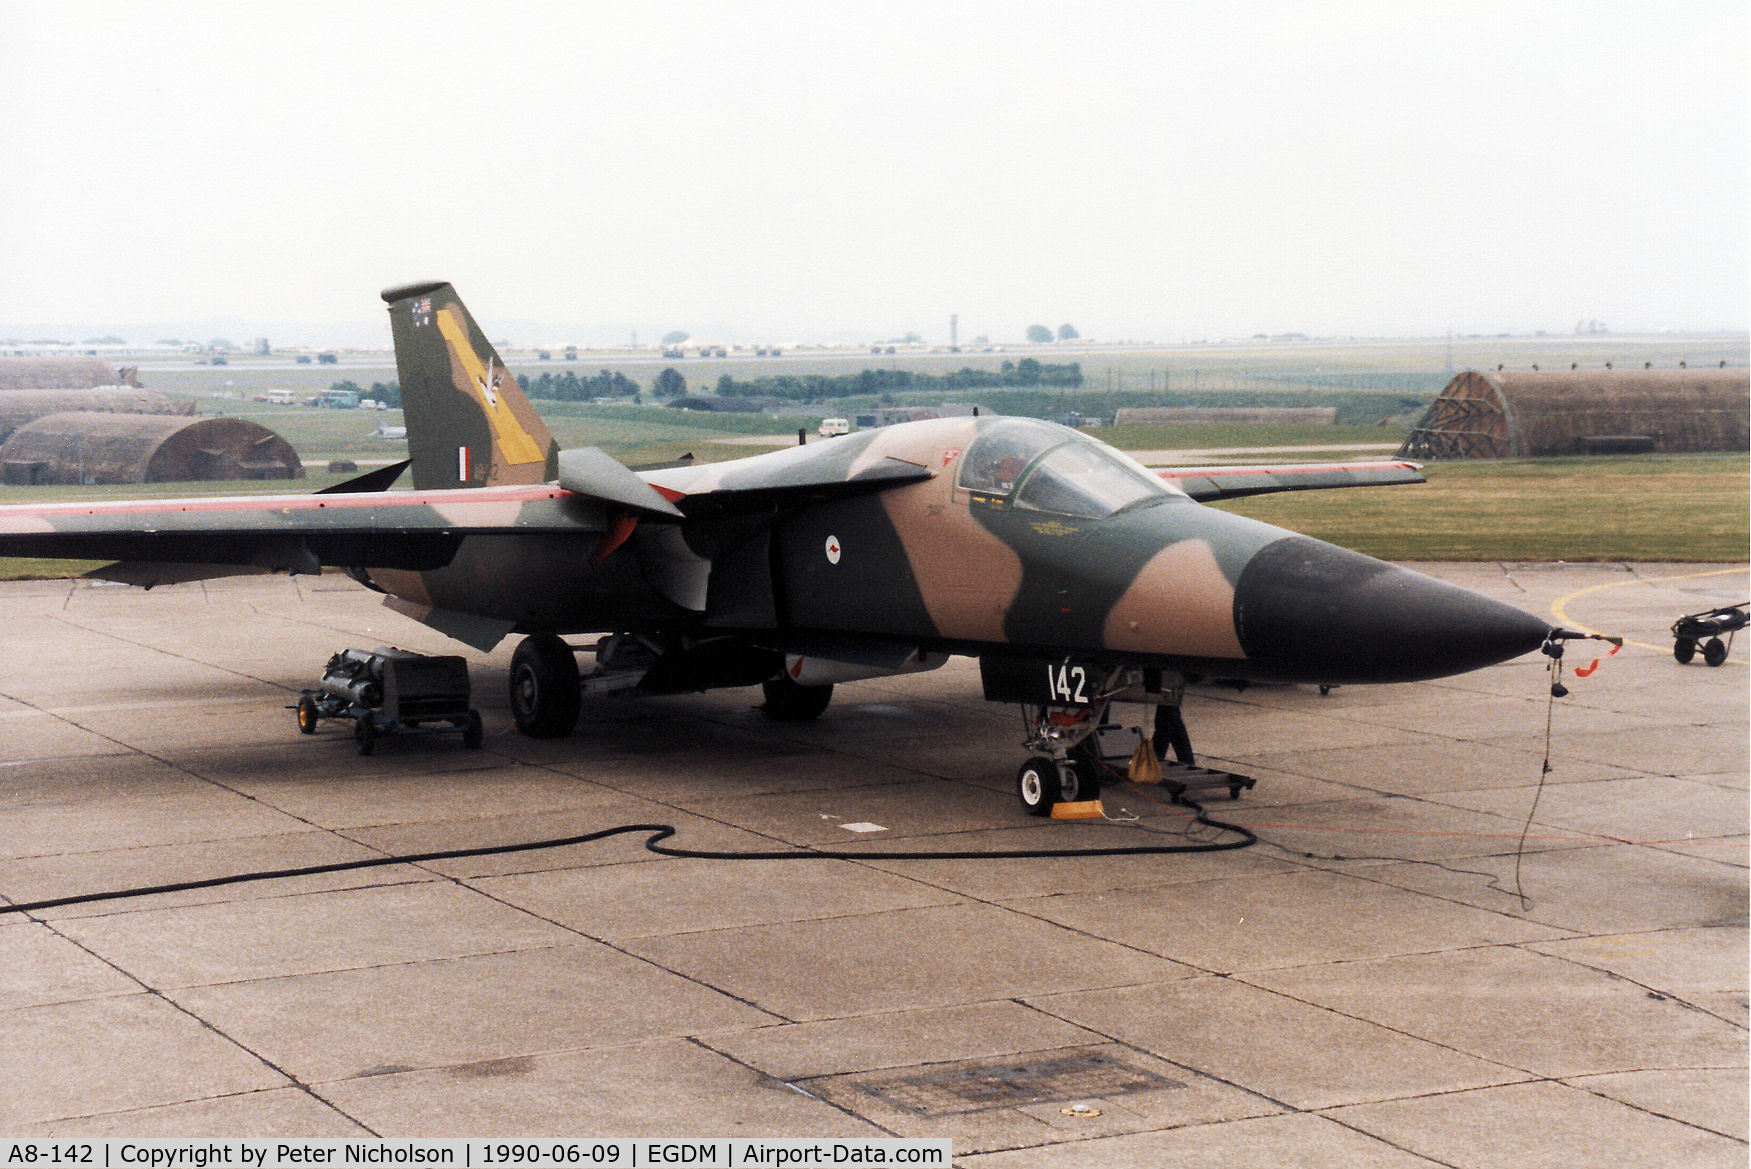 A8-142, 1973 General Dynamics F-111C Aardvark C/N D1-18, F-111C, callsign Embassy 211, of 1 Squadron Royal Australian Air Force on the flight-line at the 1990 Boscombe Down Battle of Britain 50th Anniversary Airshow.